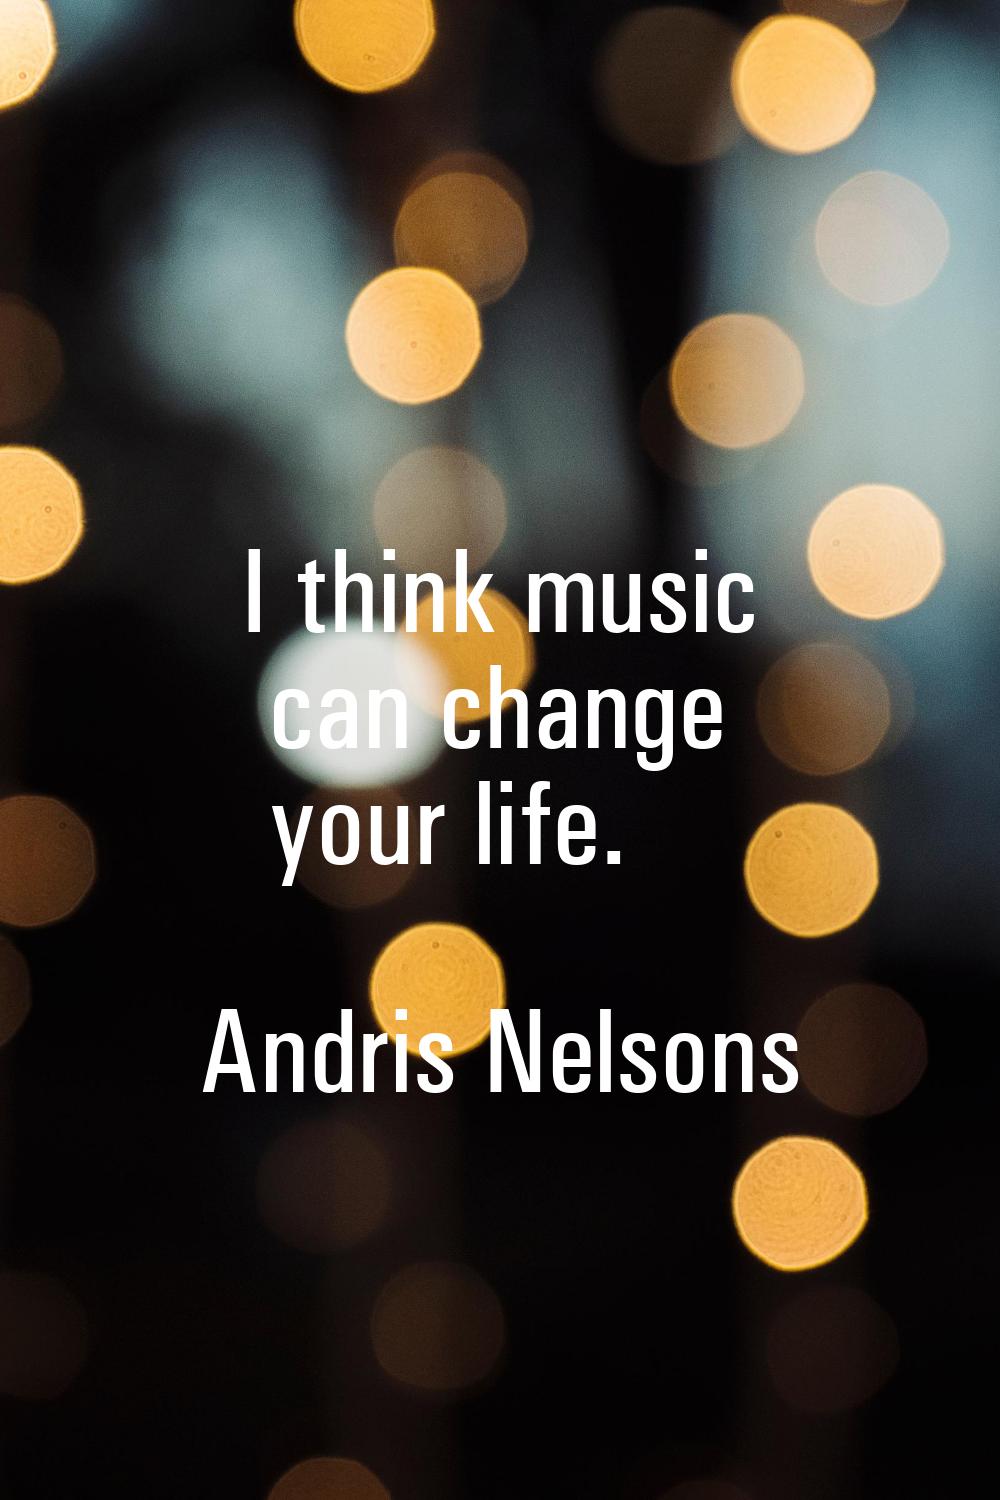 I think music can change your life.